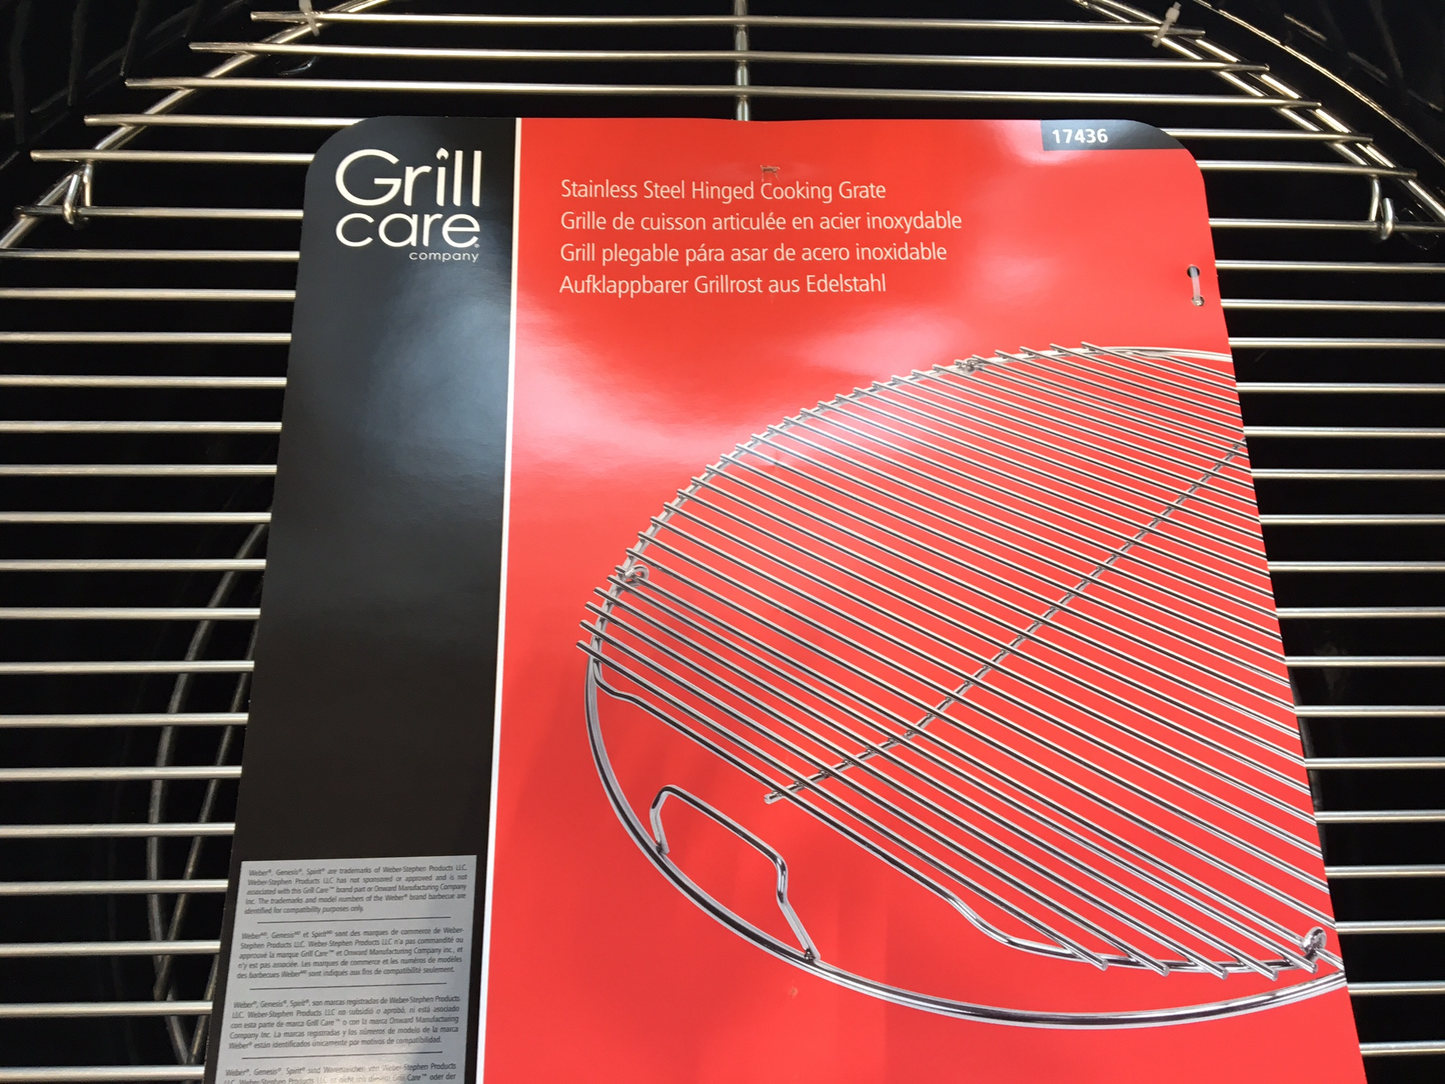 Grill Care 22.5" Stainless Steel Grill - 17436 | Stop by Barbecues Galore and let us help you get fired up in time for summer. Check out any of our 5 stores: Burlington, Oakville, Etobicoke & Calgary